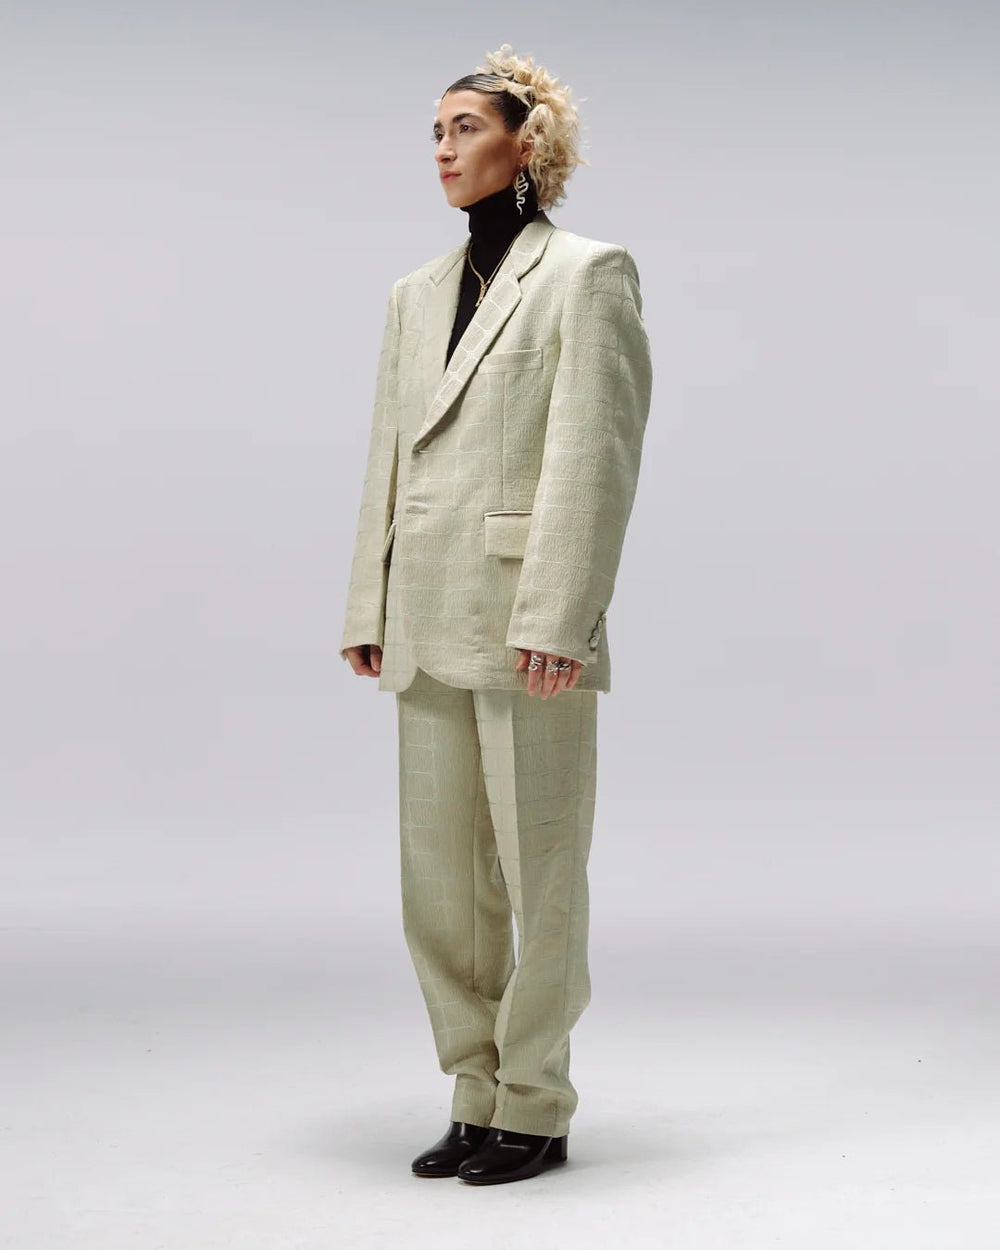 Unisex Business Unusual Suit — Vintage Mint by Emeka at White Label Project